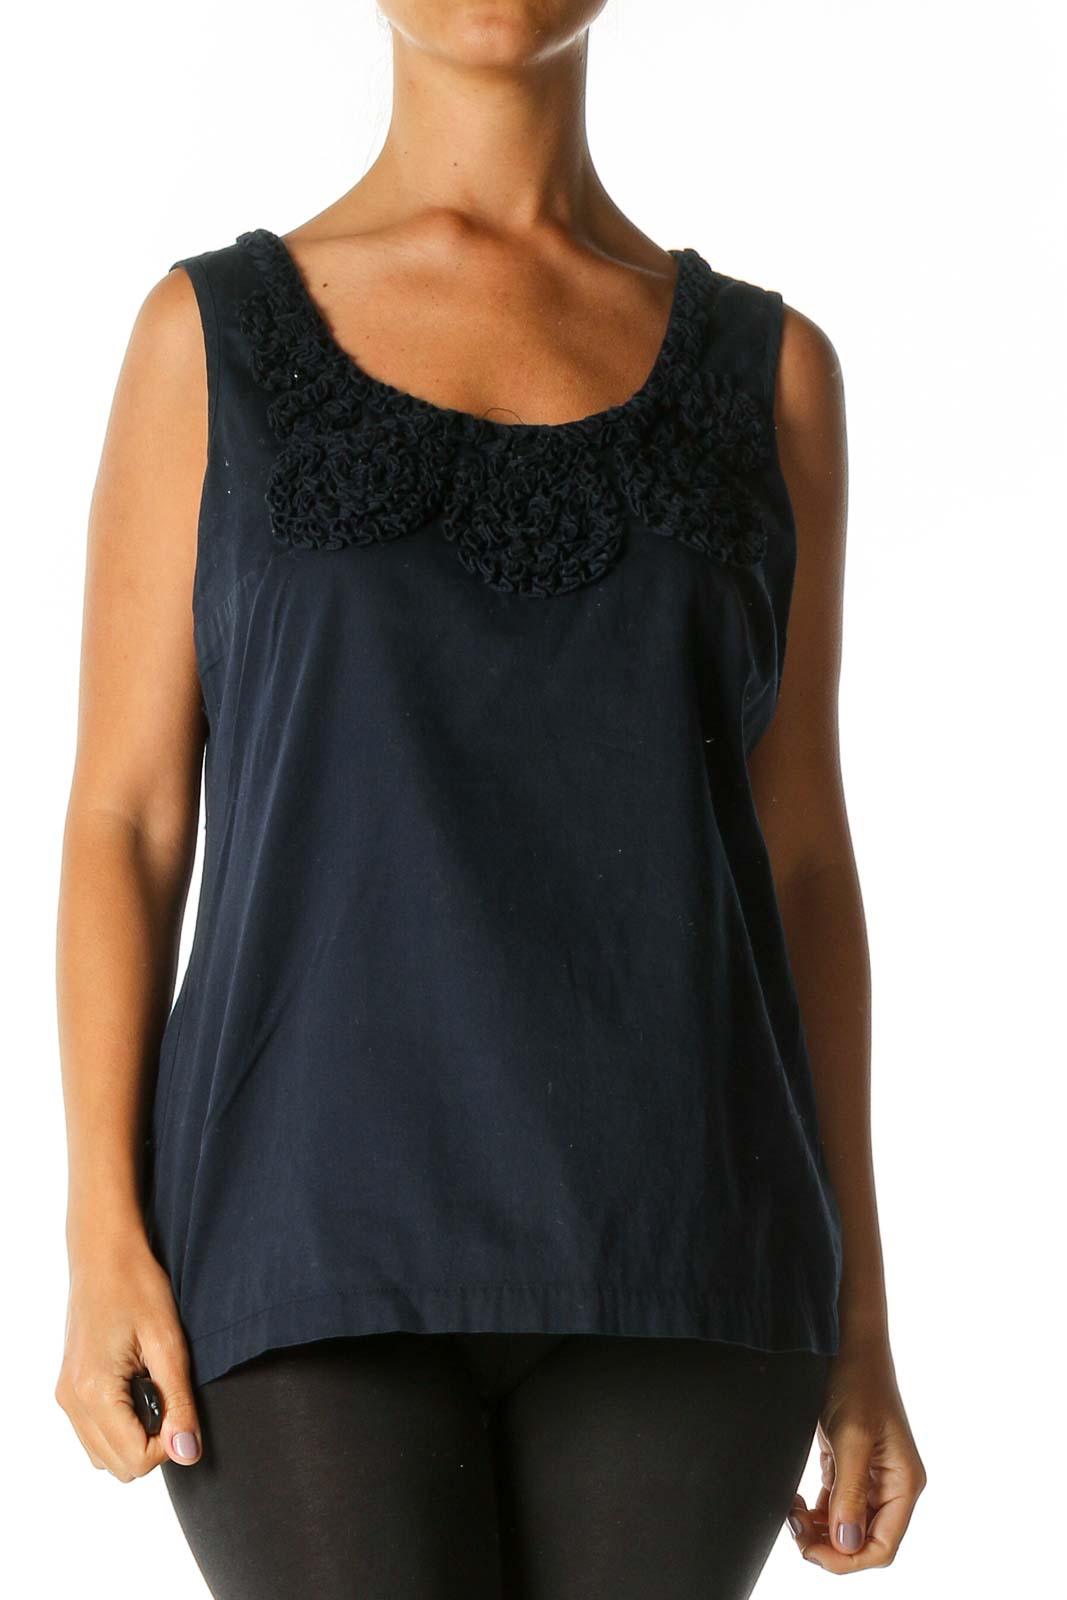 Navy Blue Crochet Detail Casual Tank Top Front